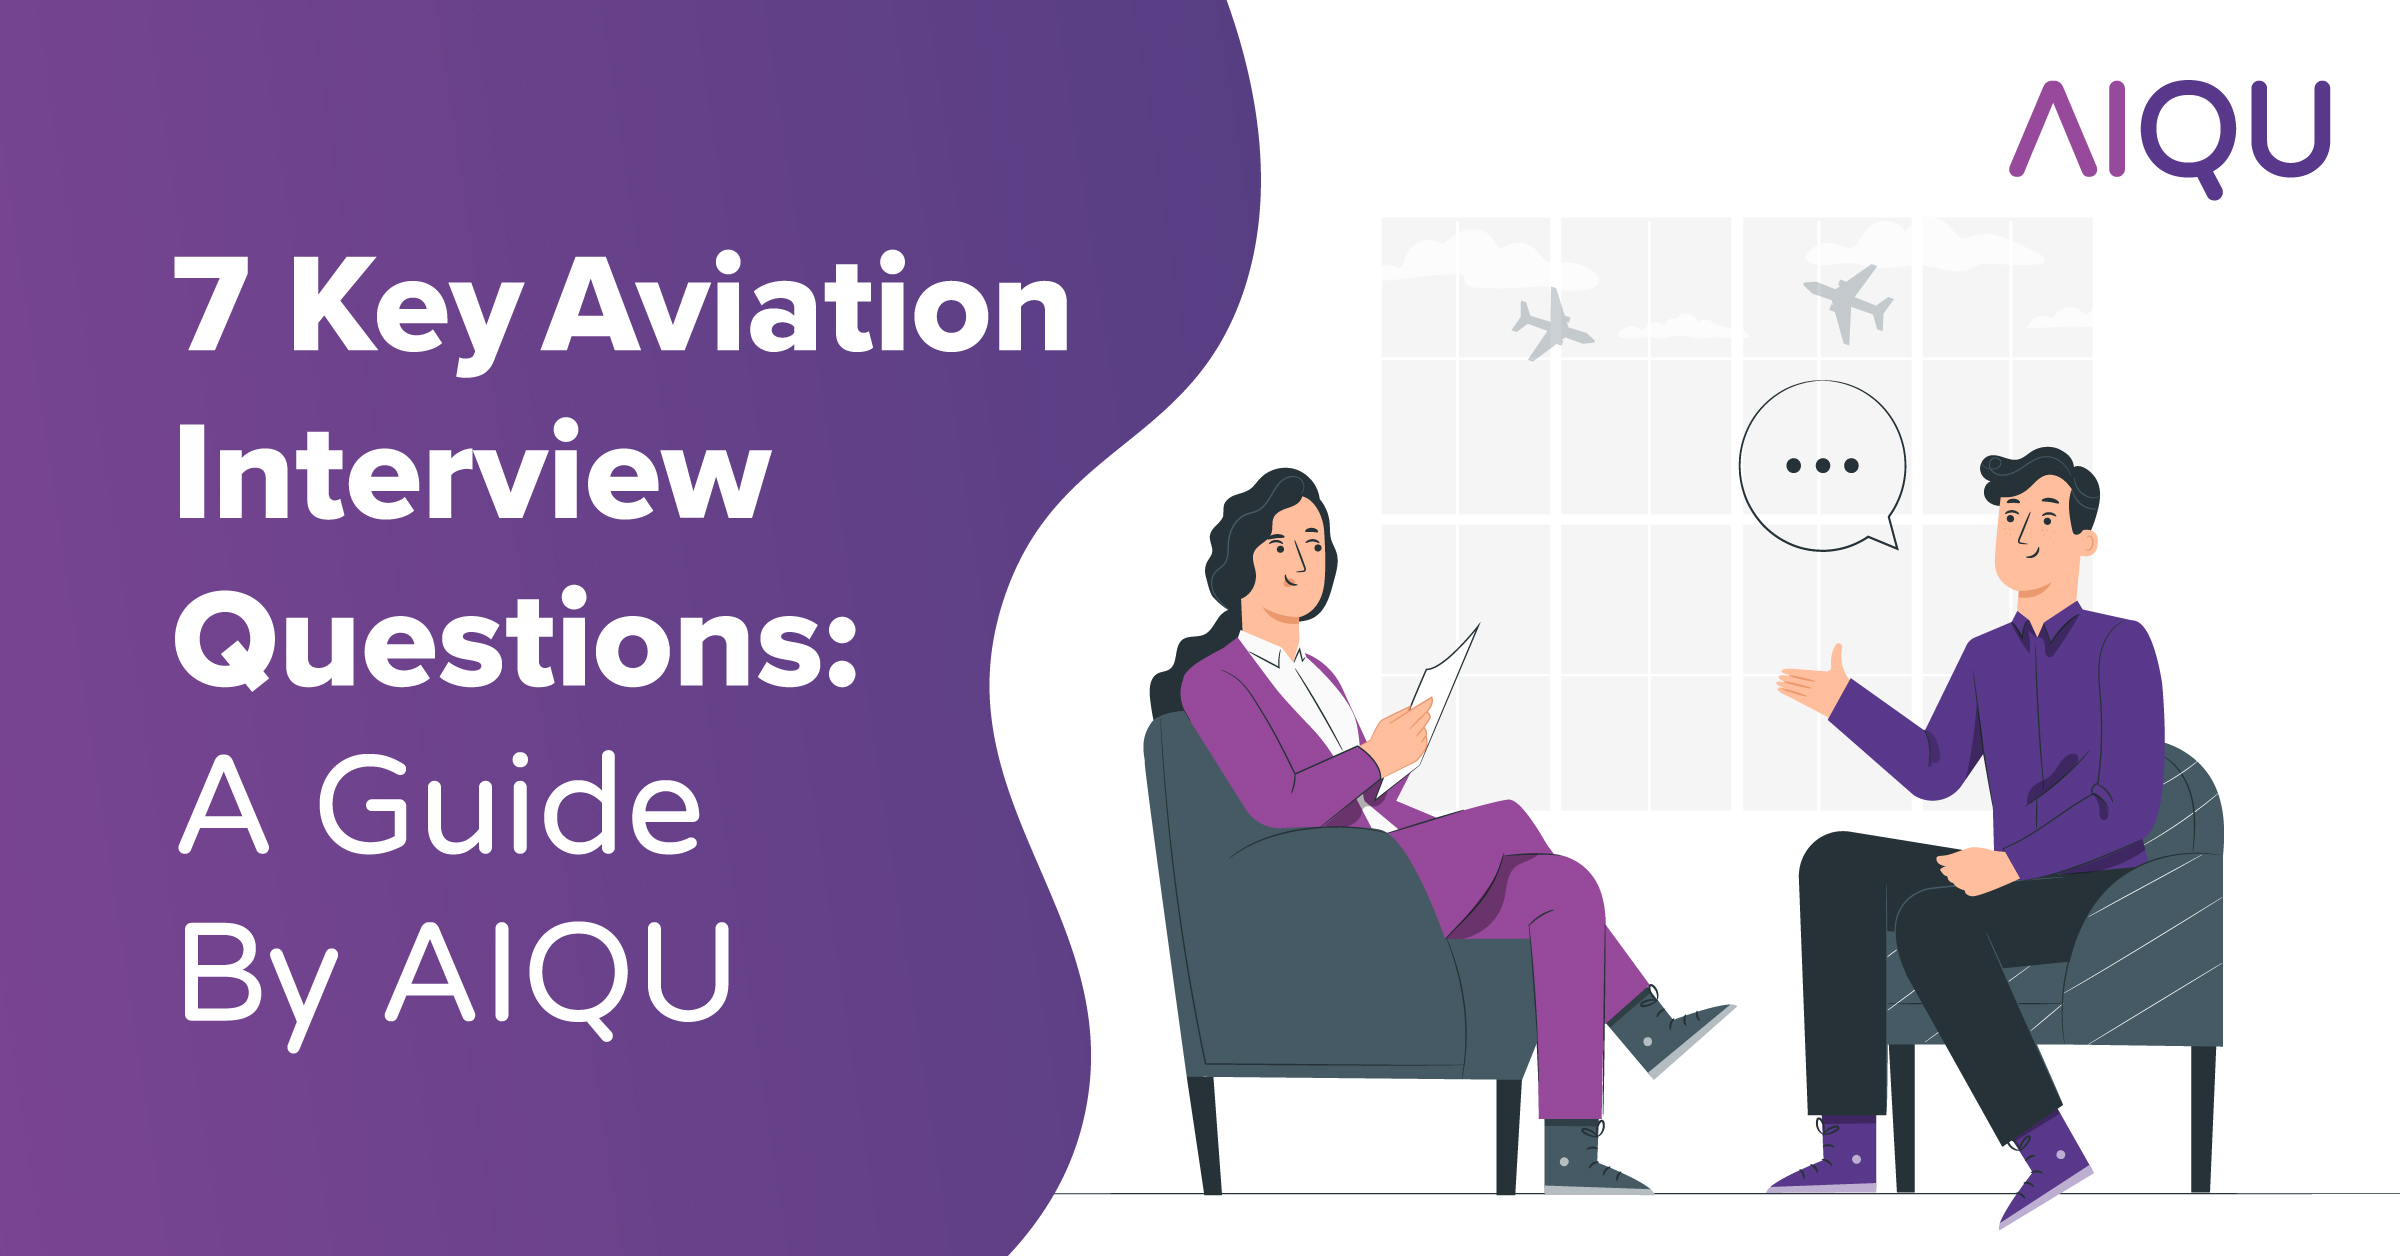 7 Key Aviation Interview Questions